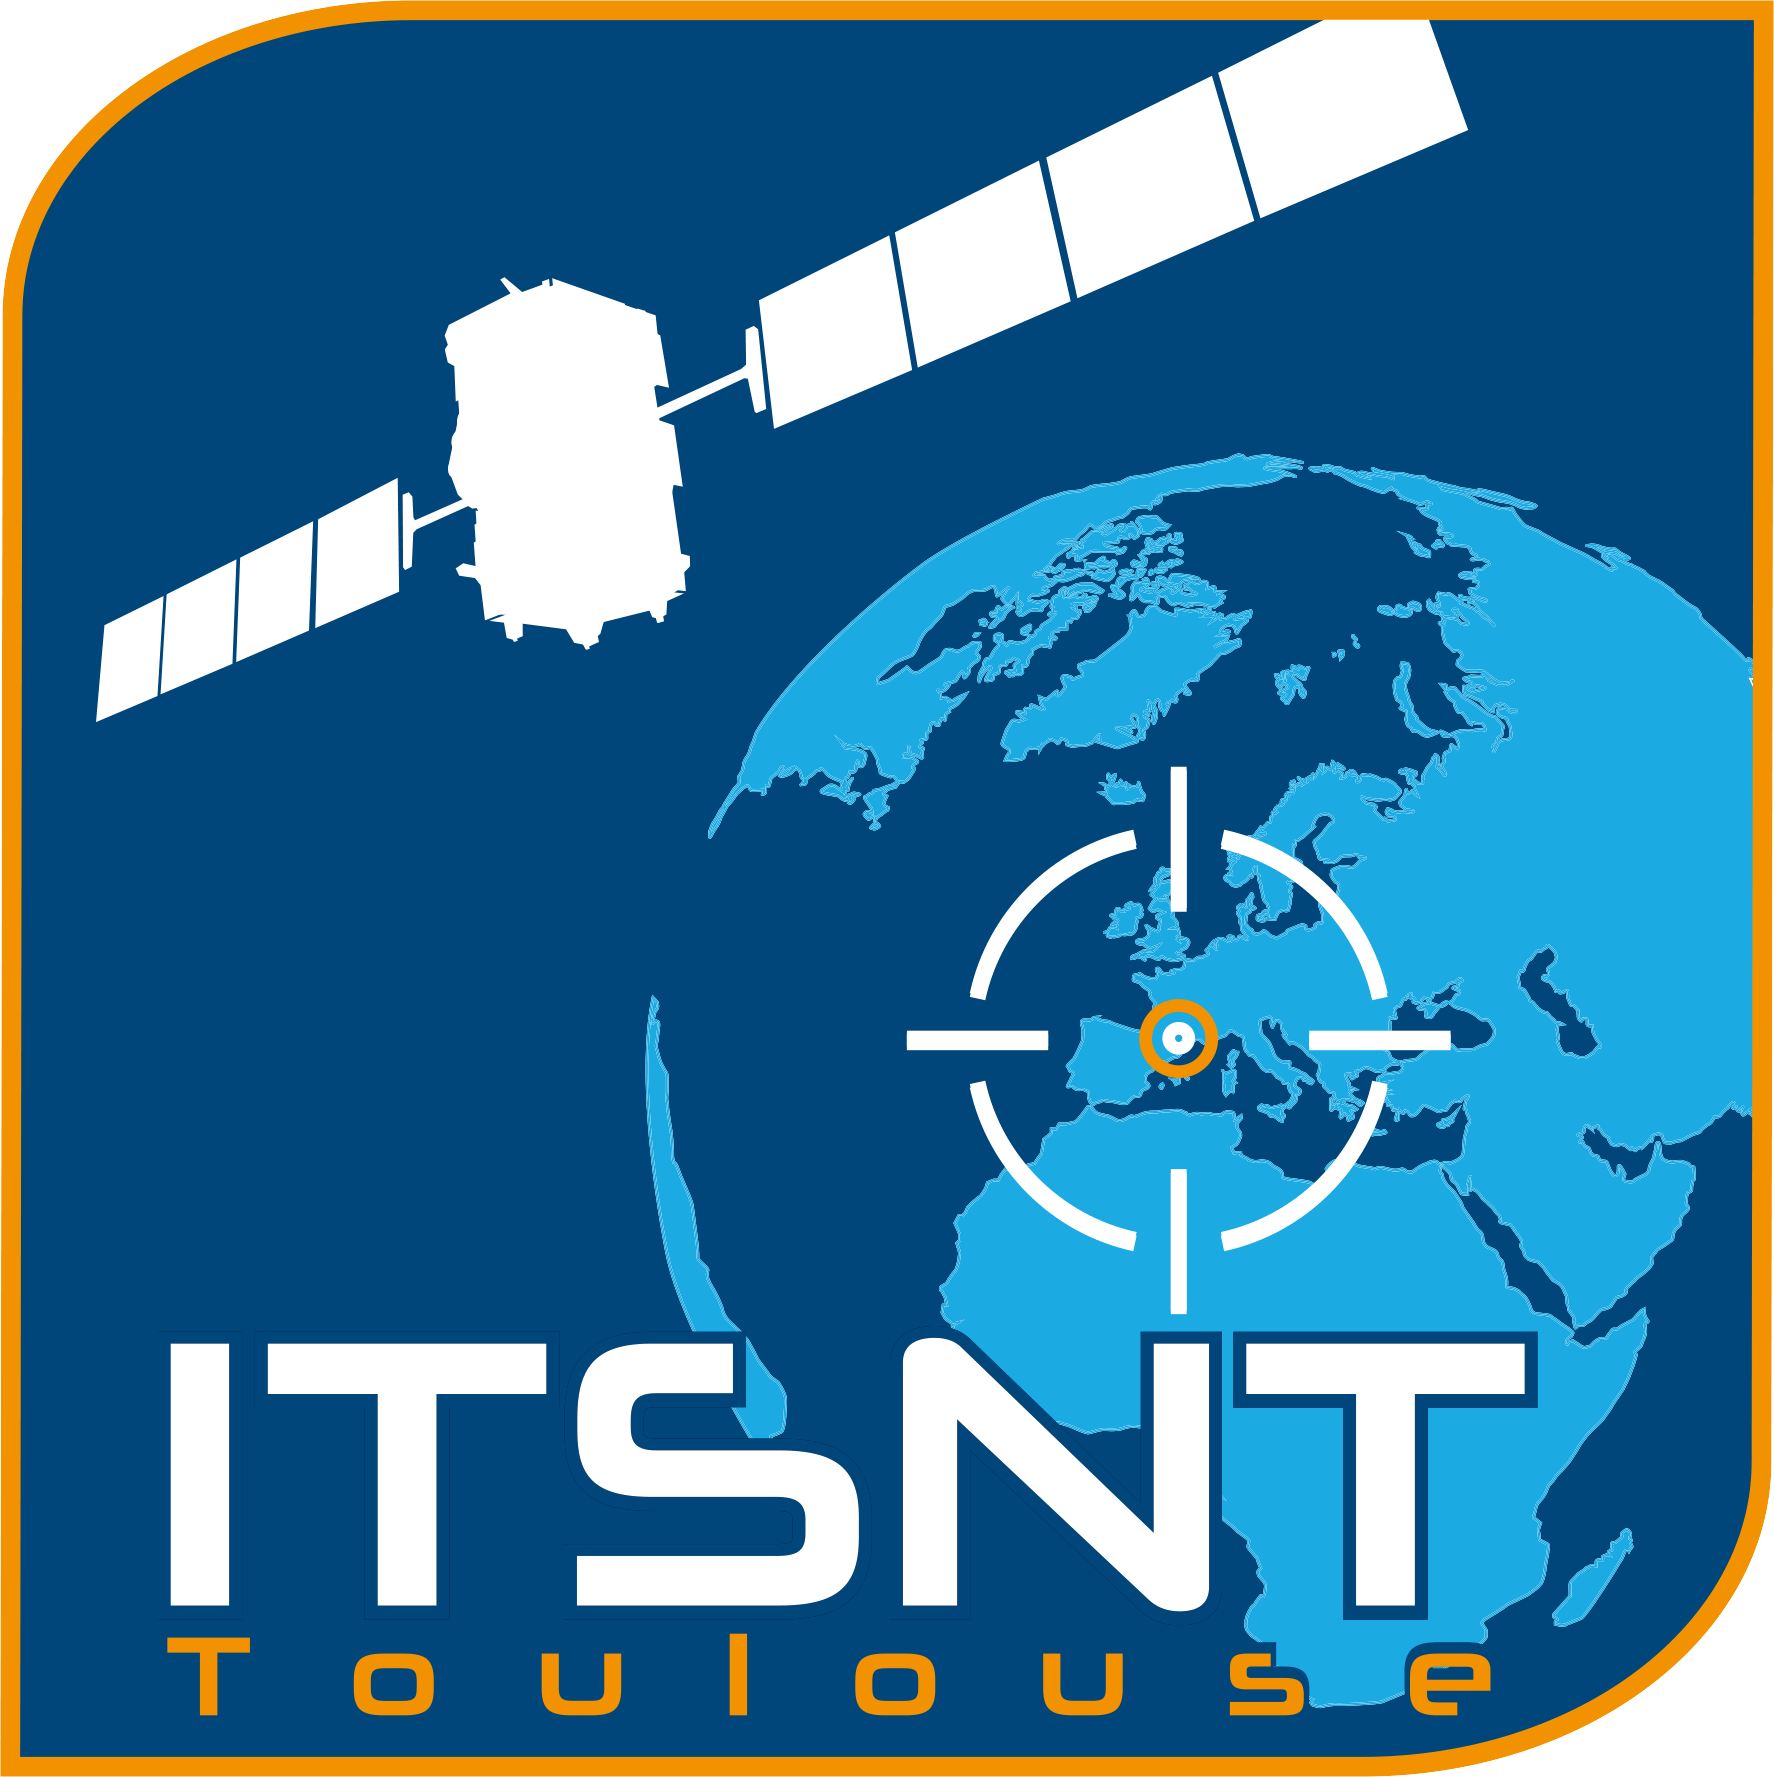 International Technical Symposium on Navigation and Timing Held This Week in Toulouse, France